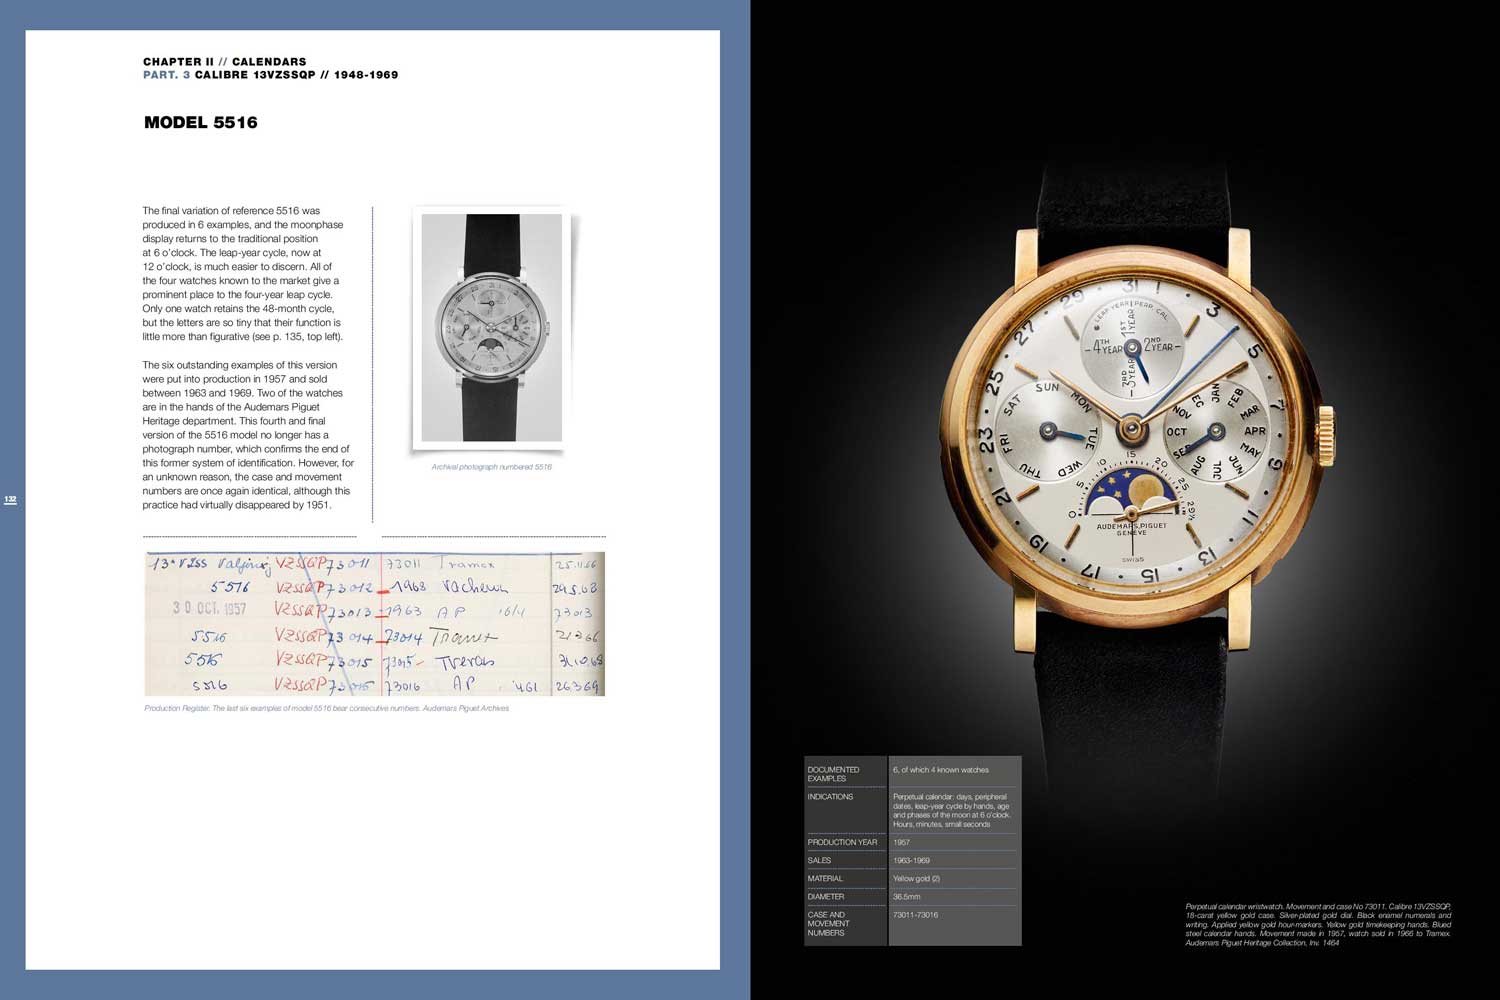 Pages from the 
Audemars Piguet 20th Century Complicated Wristwatches, collective work by Audemars Piguet